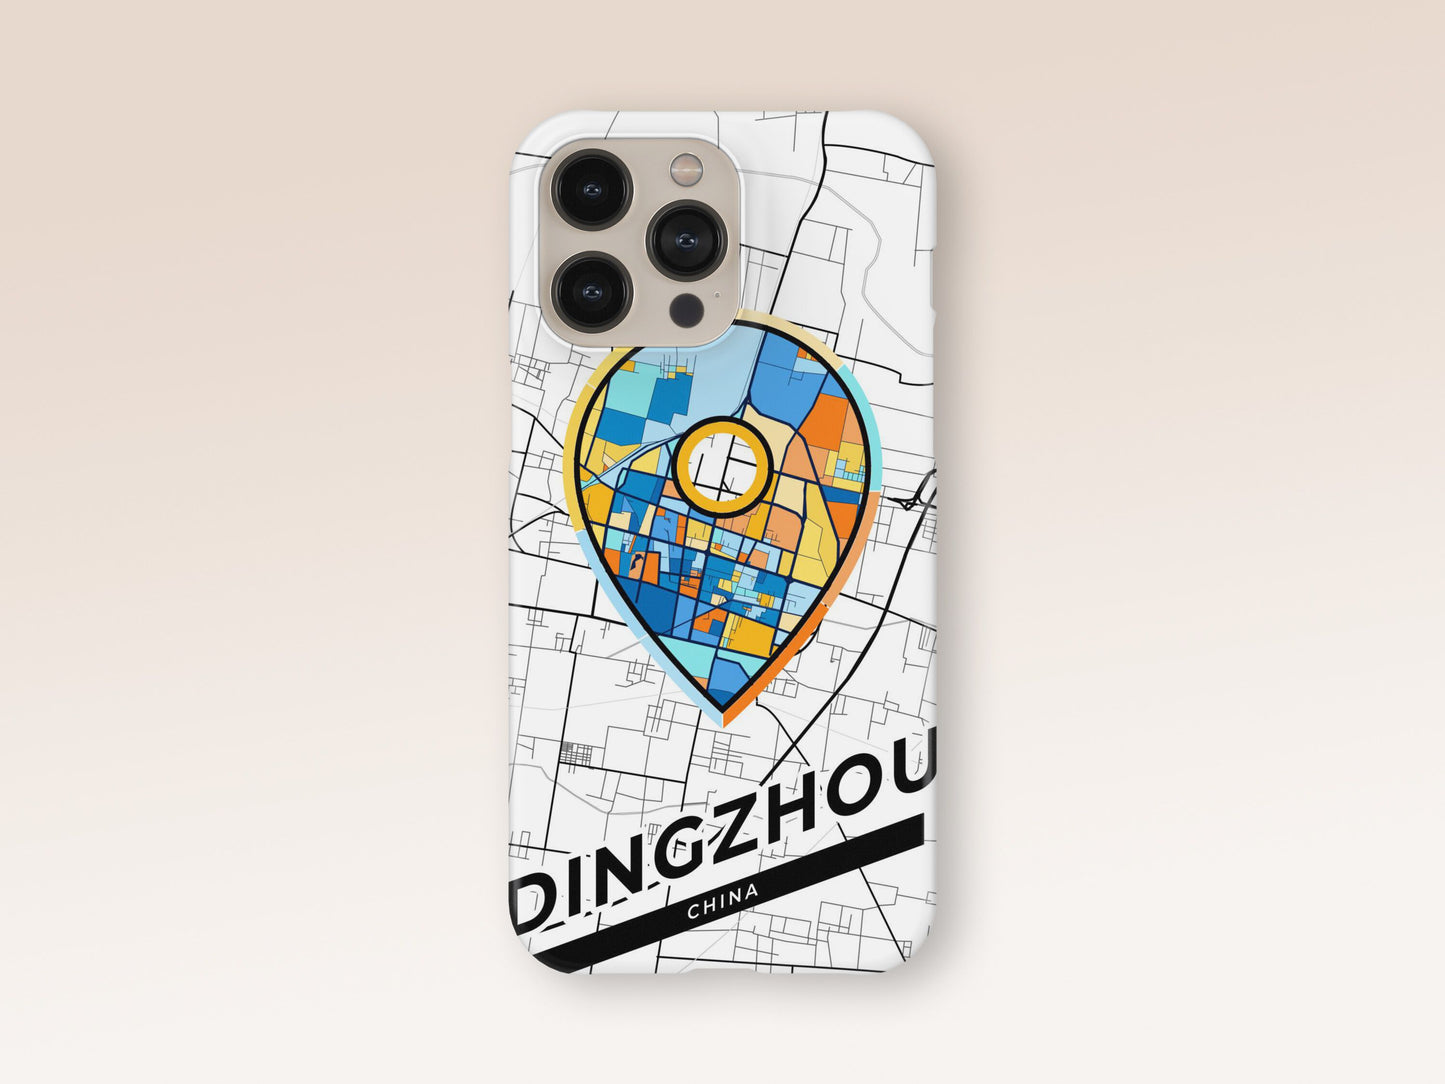 Dingzhou China slim phone case with colorful icon. Birthday, wedding or housewarming gift. Couple match cases. 1